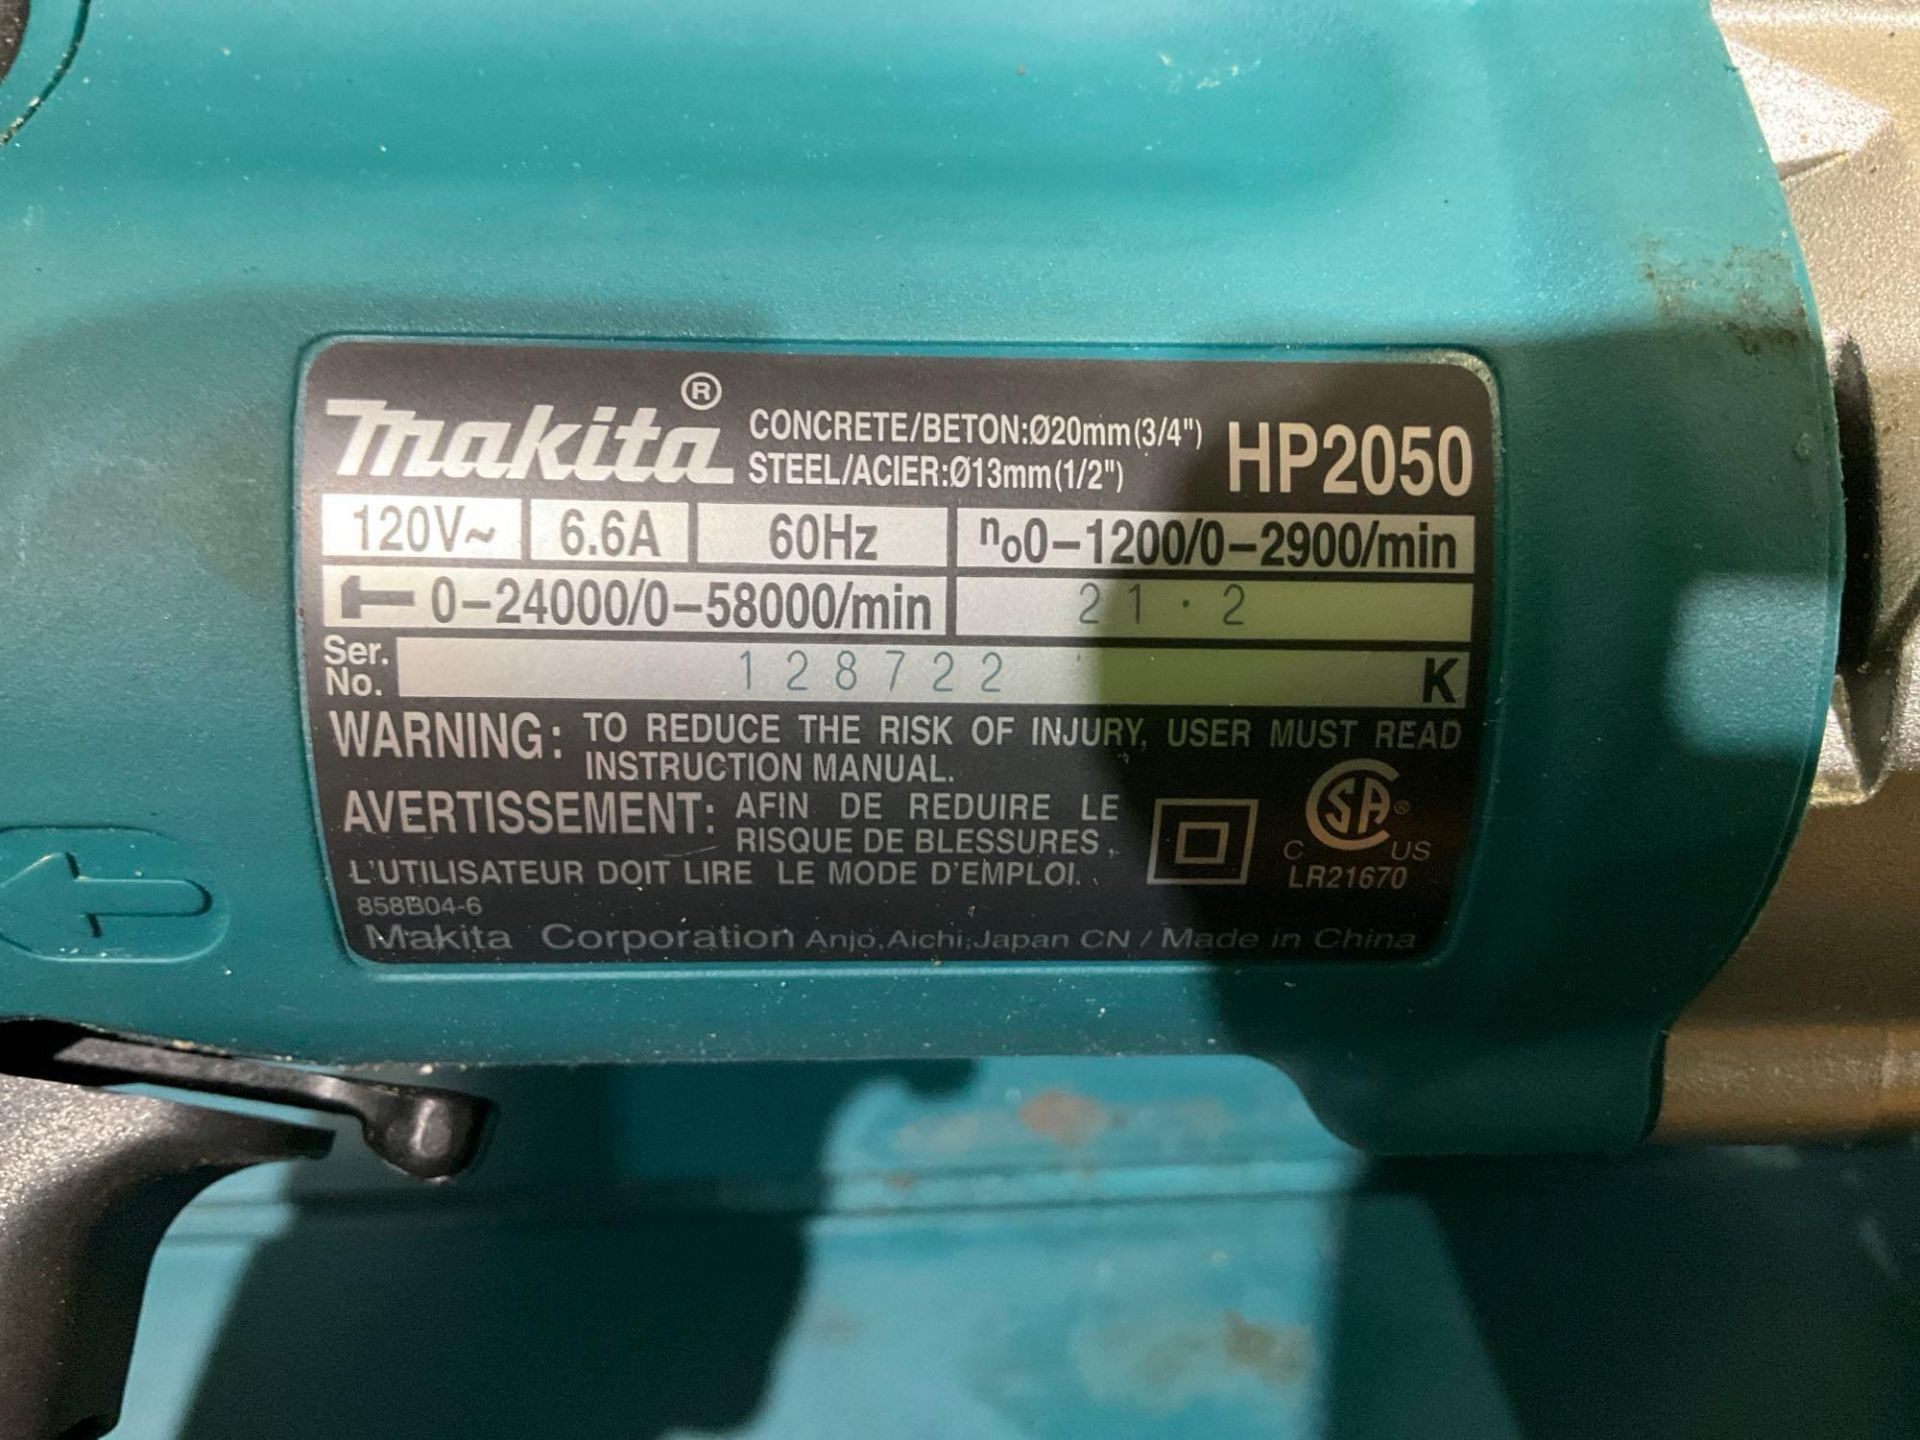 MAKITA 2 SPEED HAMMER DRILL MODEL HP2050 WITH CARRYING CASE , 120VOLTS, 6.6A, RECONDITIONED - Image 3 of 6